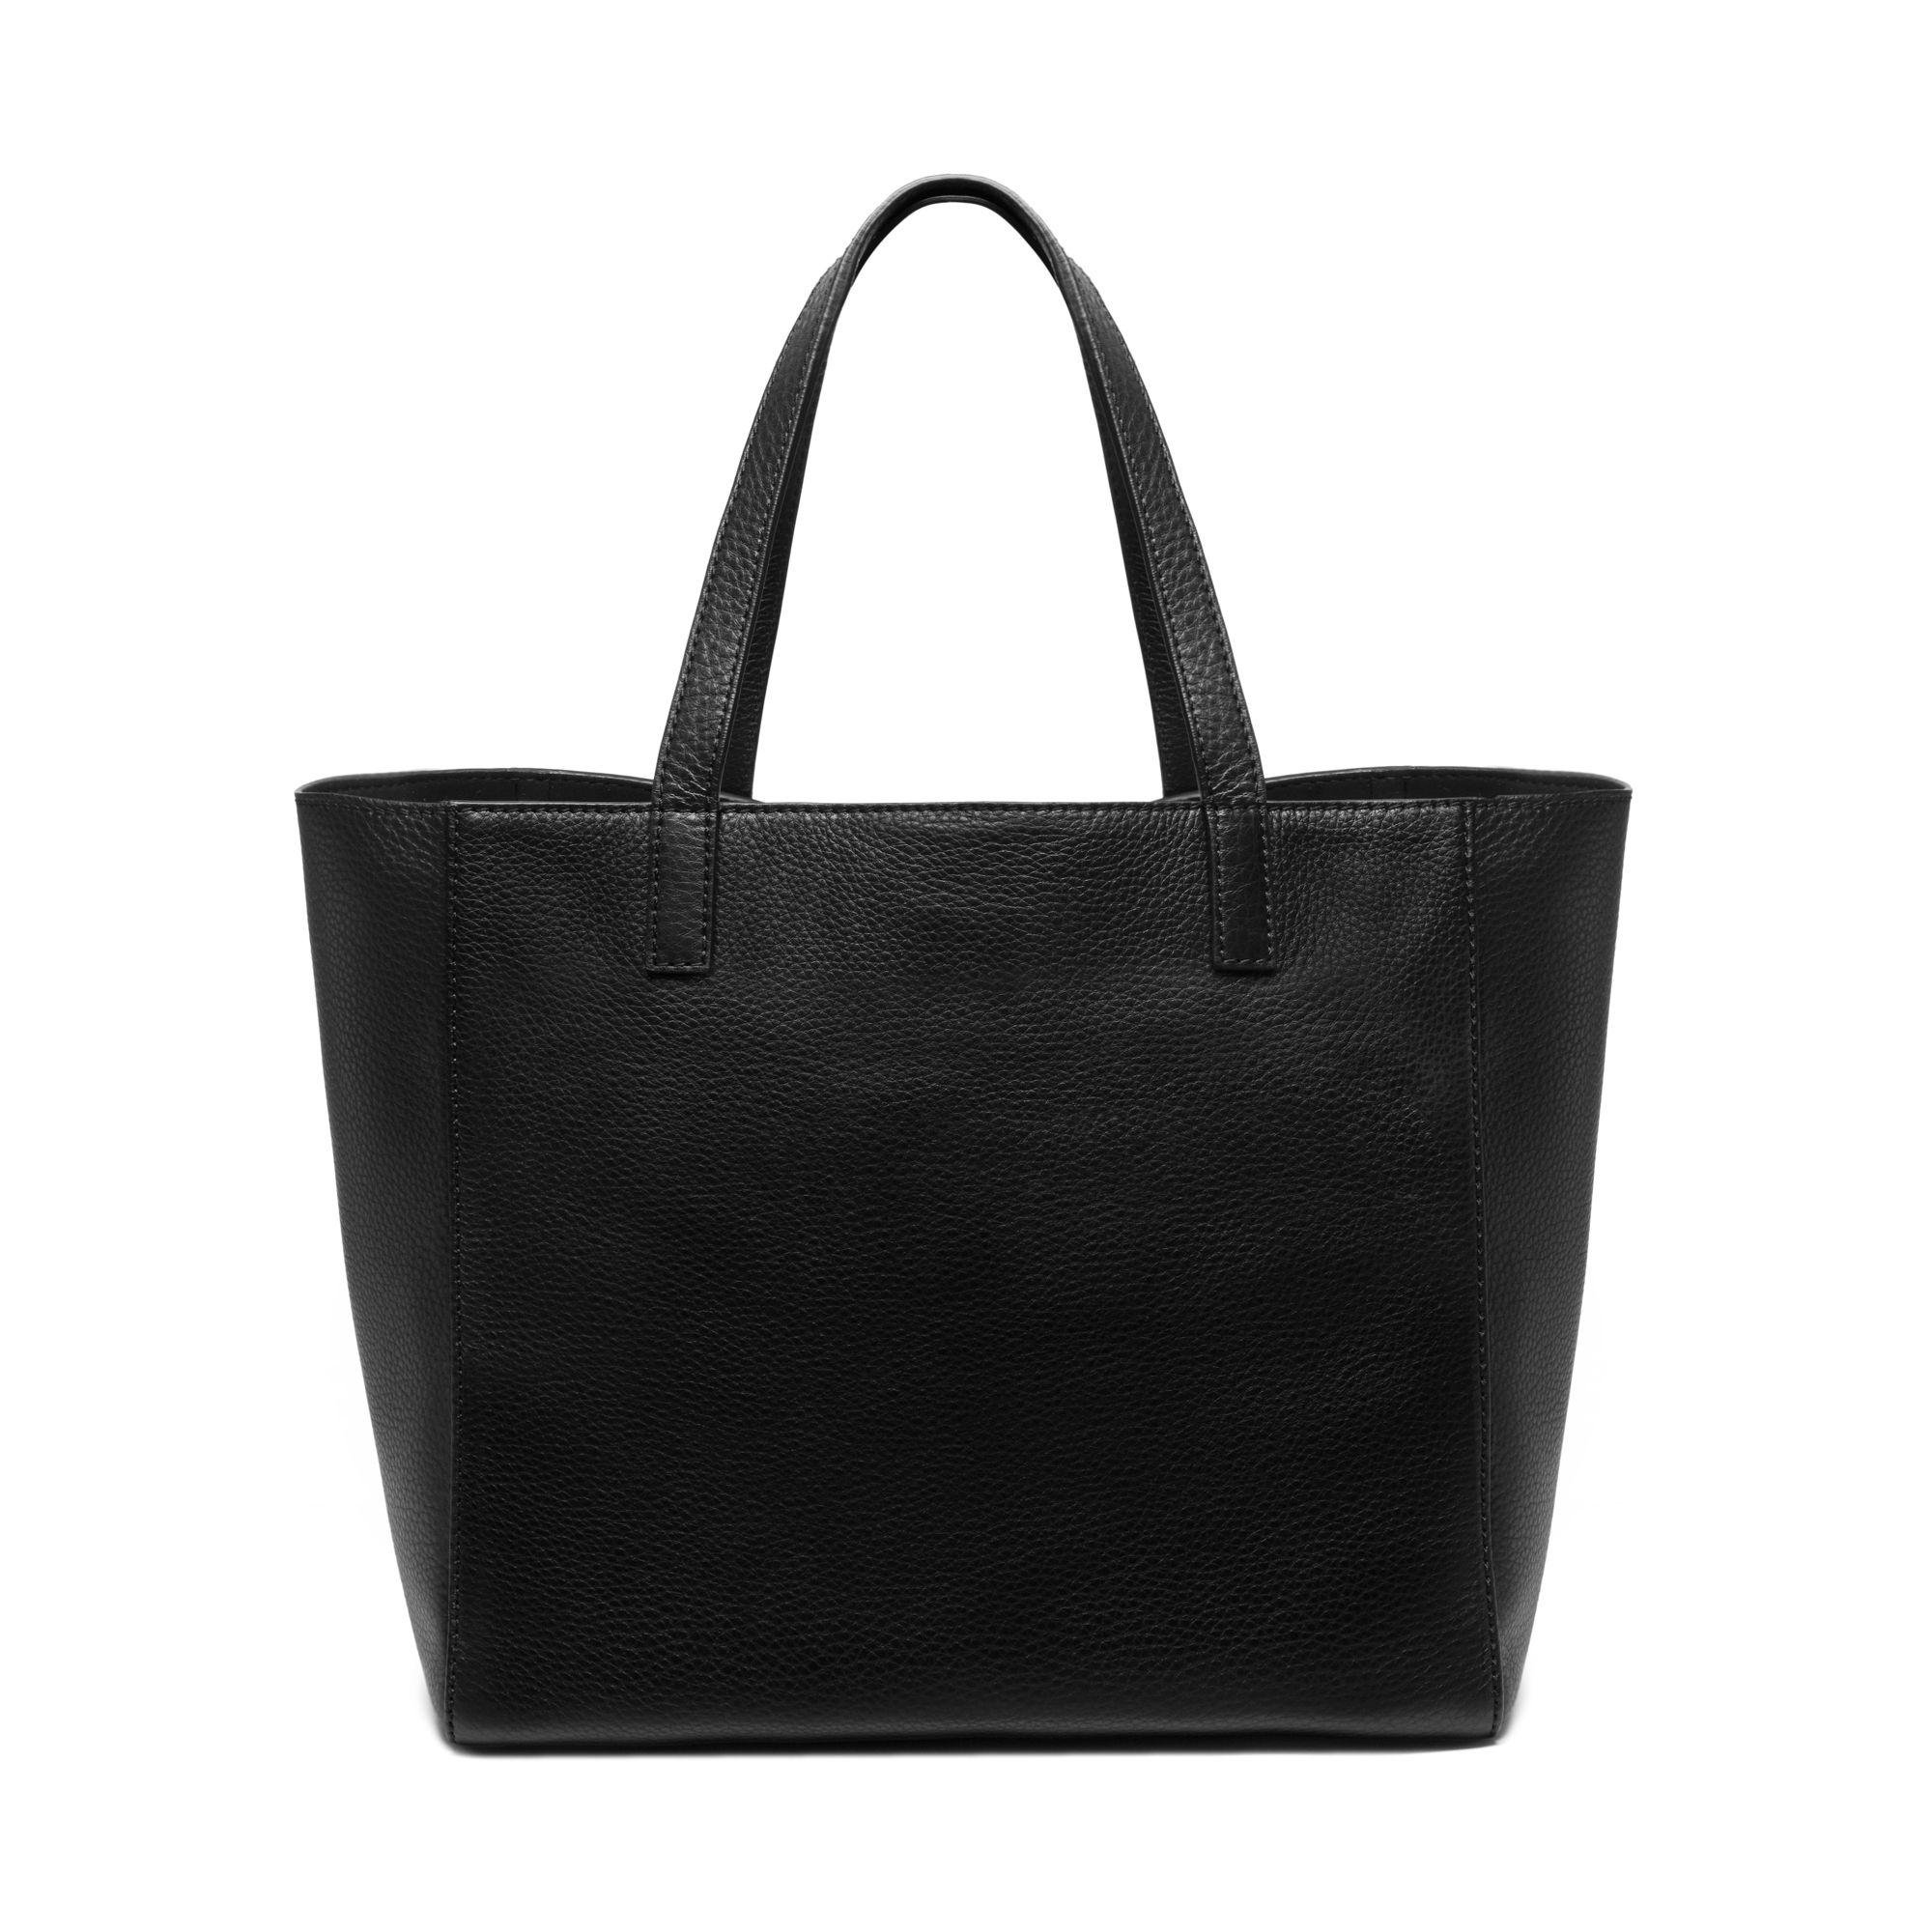 Mulberry Tessie Tote in Black - Lyst